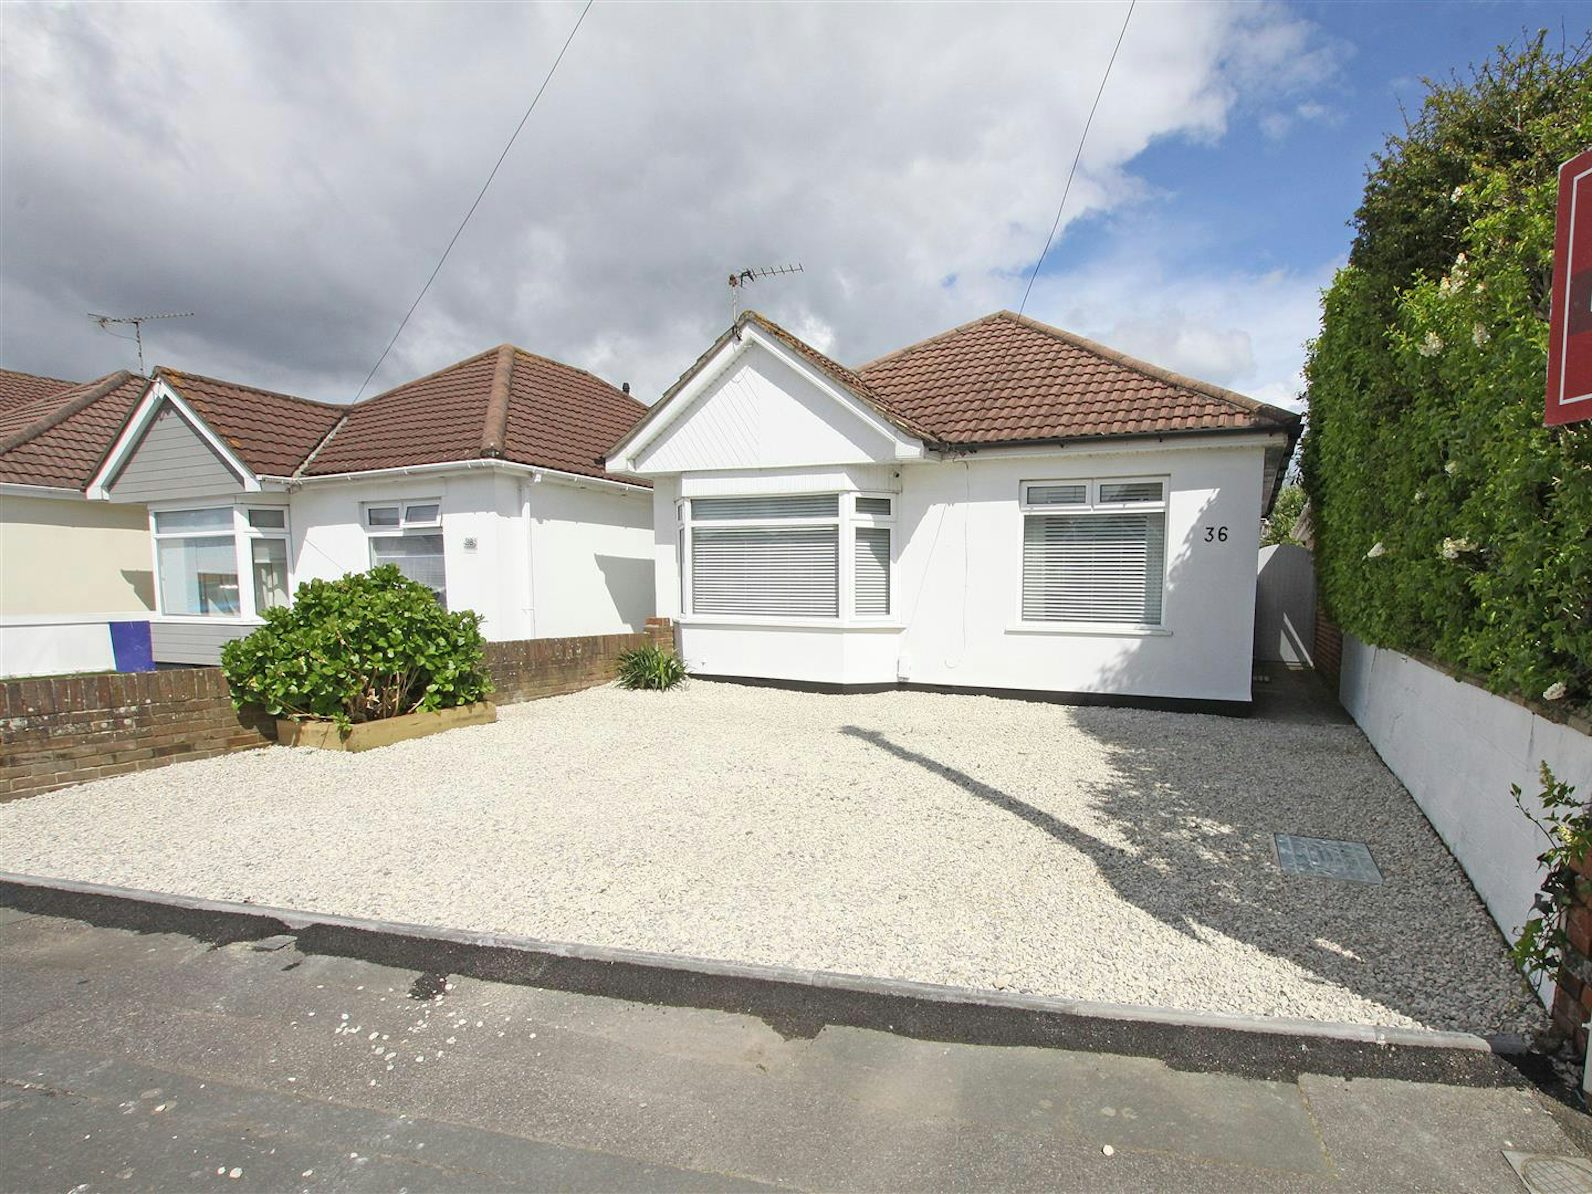 Detached bungalow for sale on Hawden Road Bournemouth, BH11